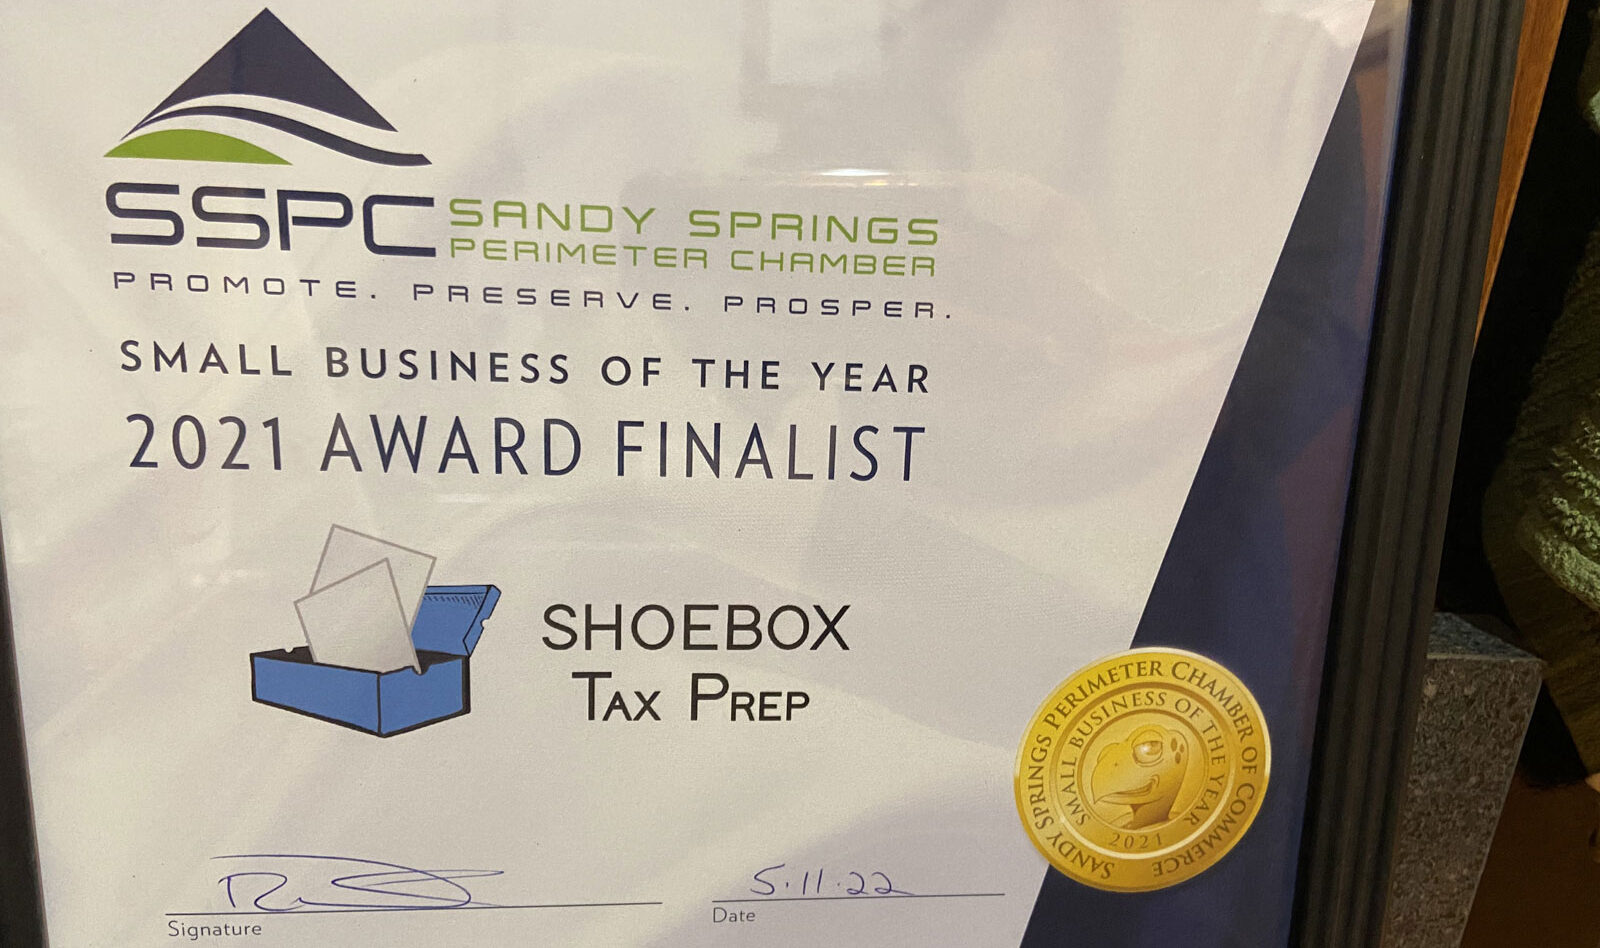 Small Business of the Year 2021 Finalist